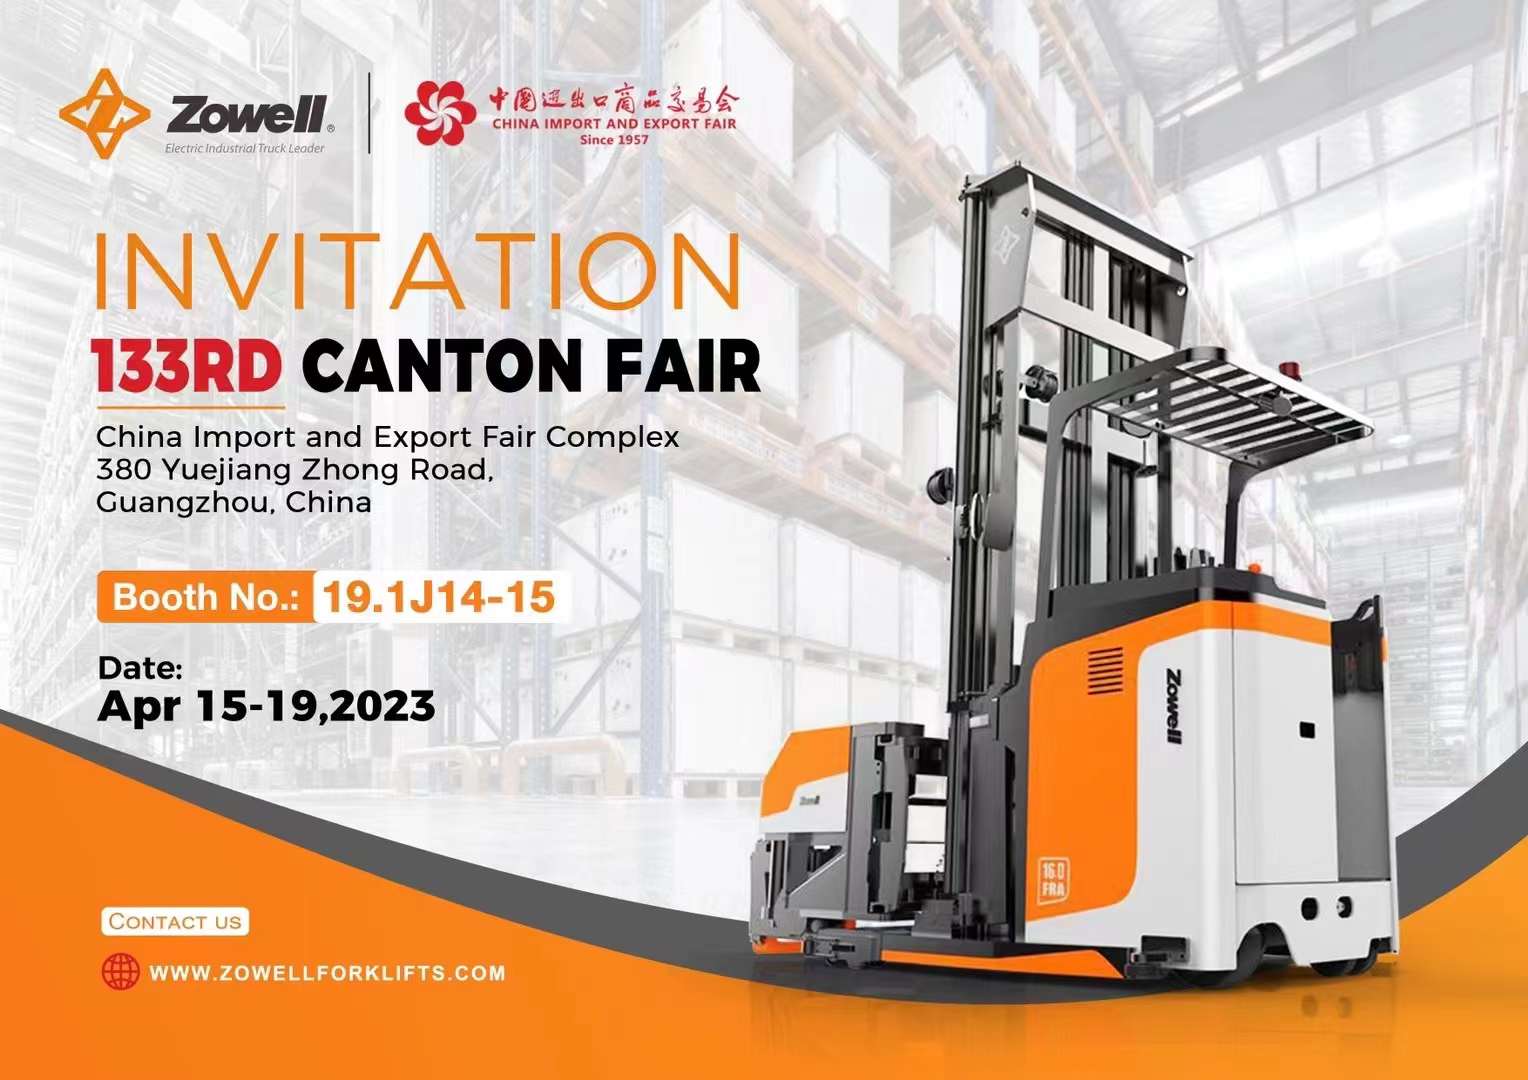 Zowell will be attending 2023 #CantonFair in Guangzhou from April 15th - 19rd